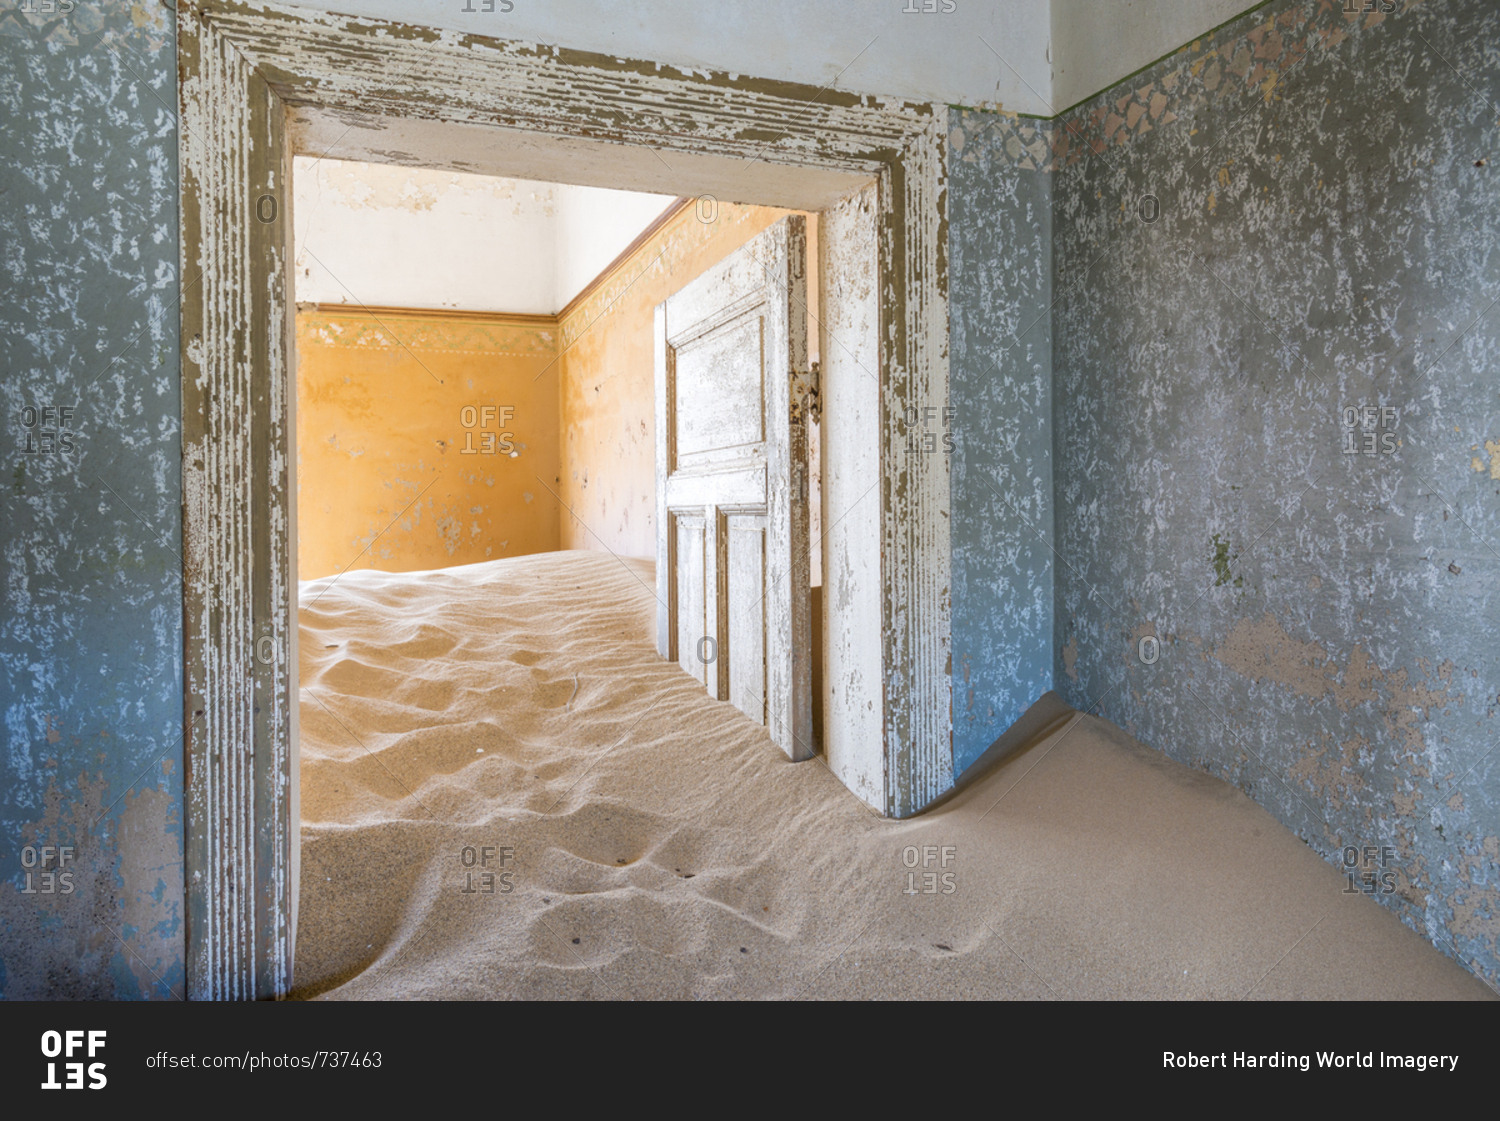 The interior of a building in the abandoned diamond mining ghost town of Kolmanskop, Namibia, Africa